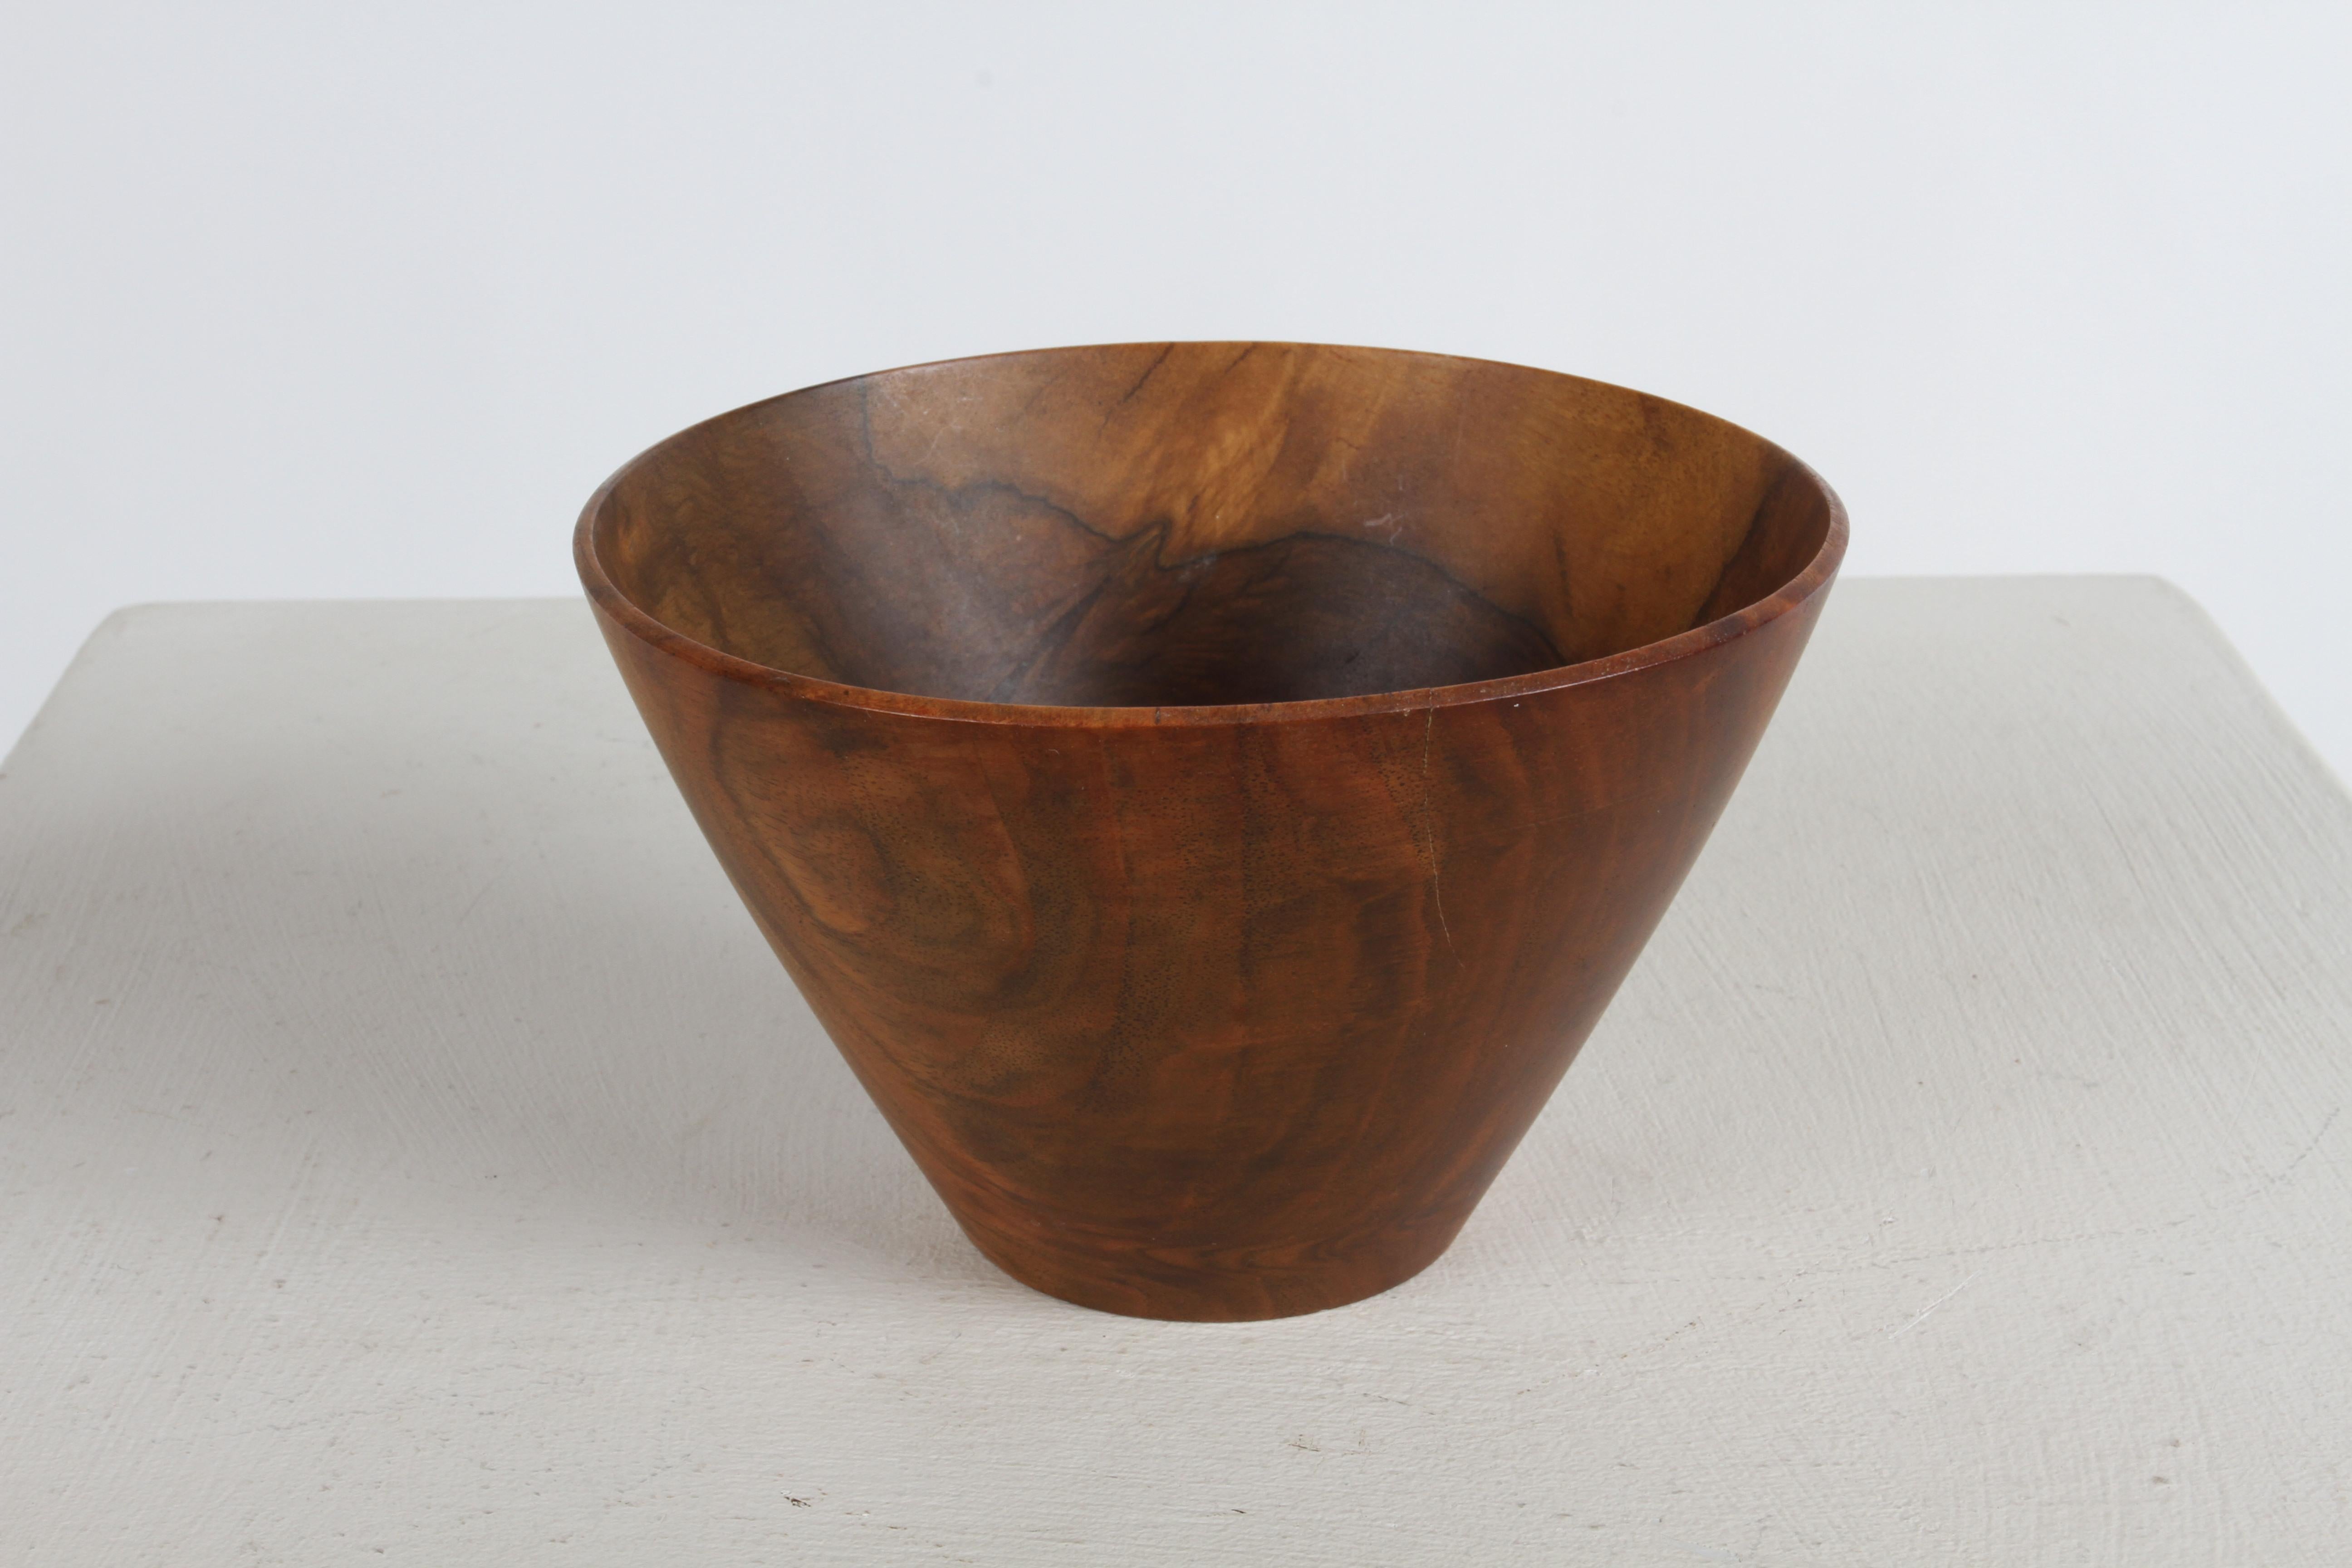 California master artist woodworker Bob Stockdale (1913-2003) finely turned bowl with thin walls made of California Walnut. Engraved on bottom Black Walnut from California and signed Bob Stockdale, no date. In fine condition, with small hairline